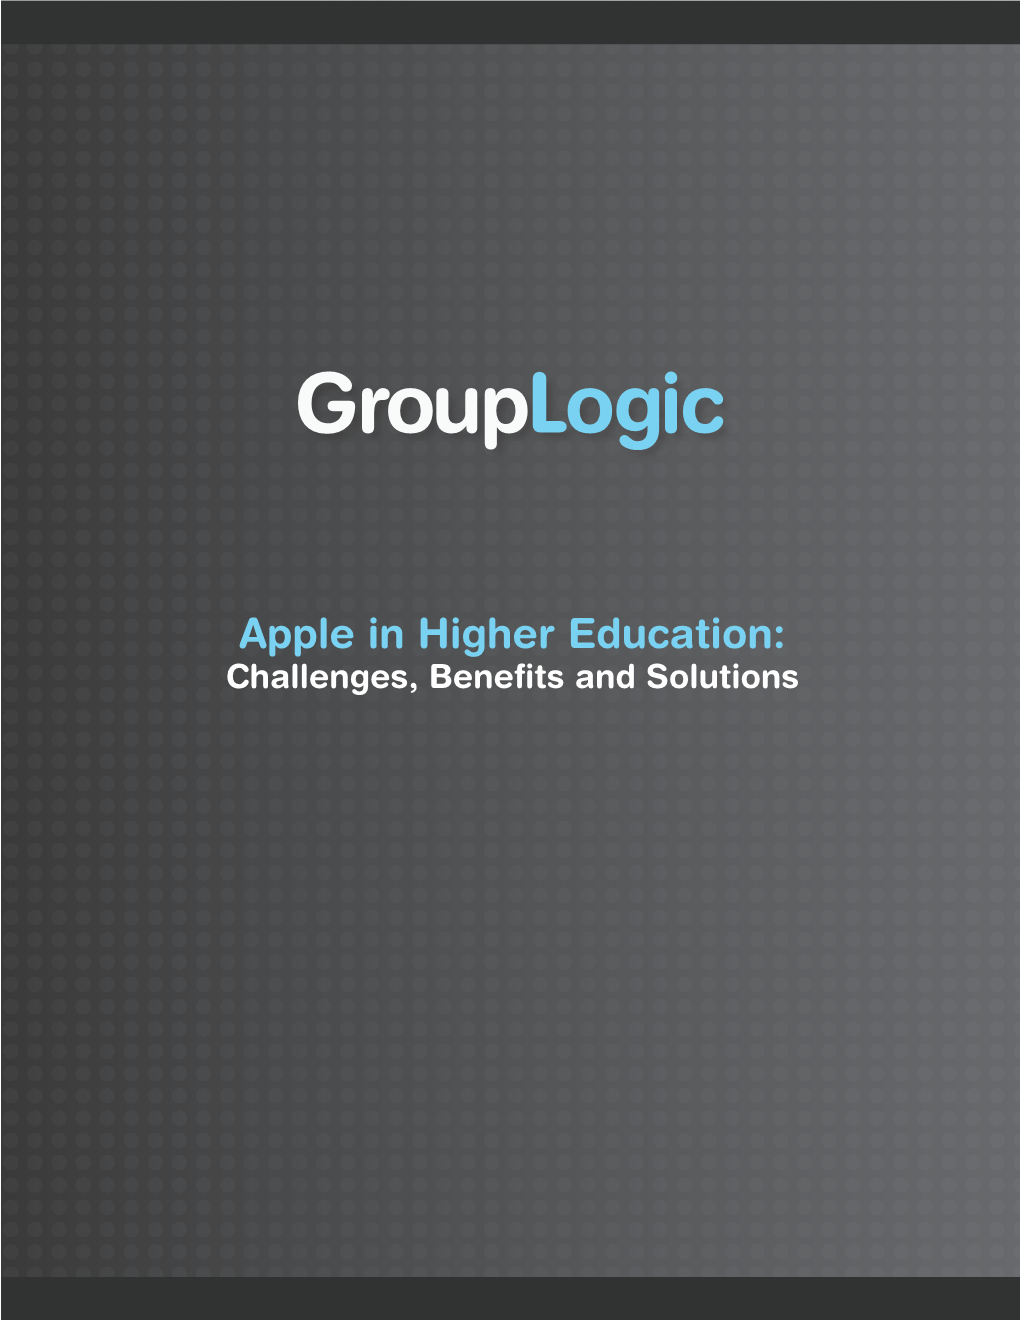 Apple in Higher Education: Challenges, Bene!Ts and Solutions INTRODUCTION